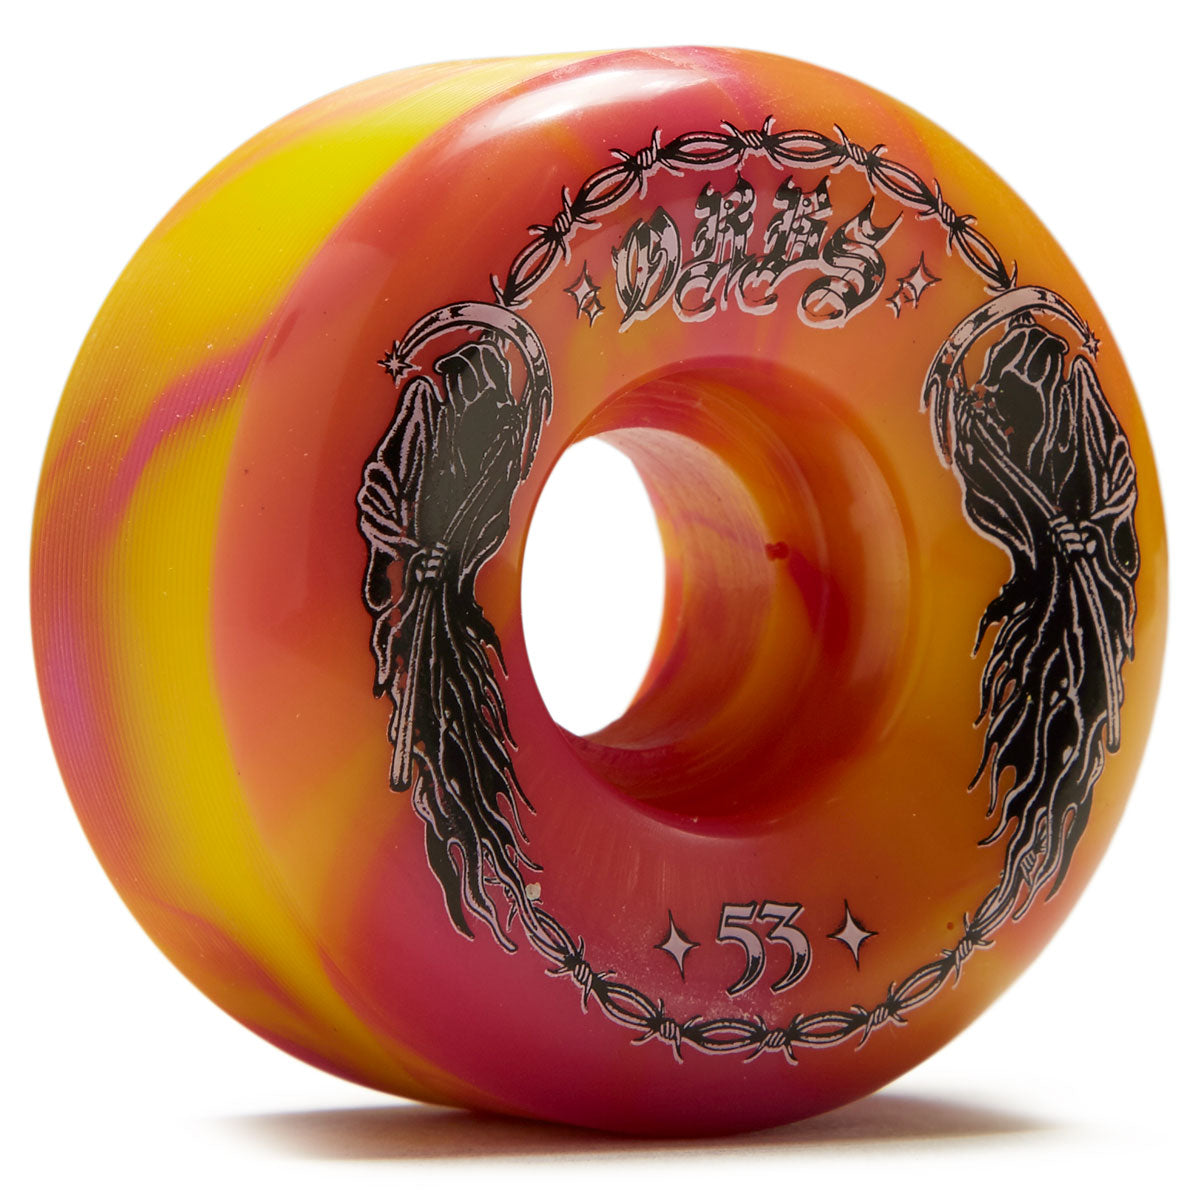 Welcome Orbs Specters '23 Conical 99A Skateboard Wheels - Pink/Yellow Swirl - 53mm image 1